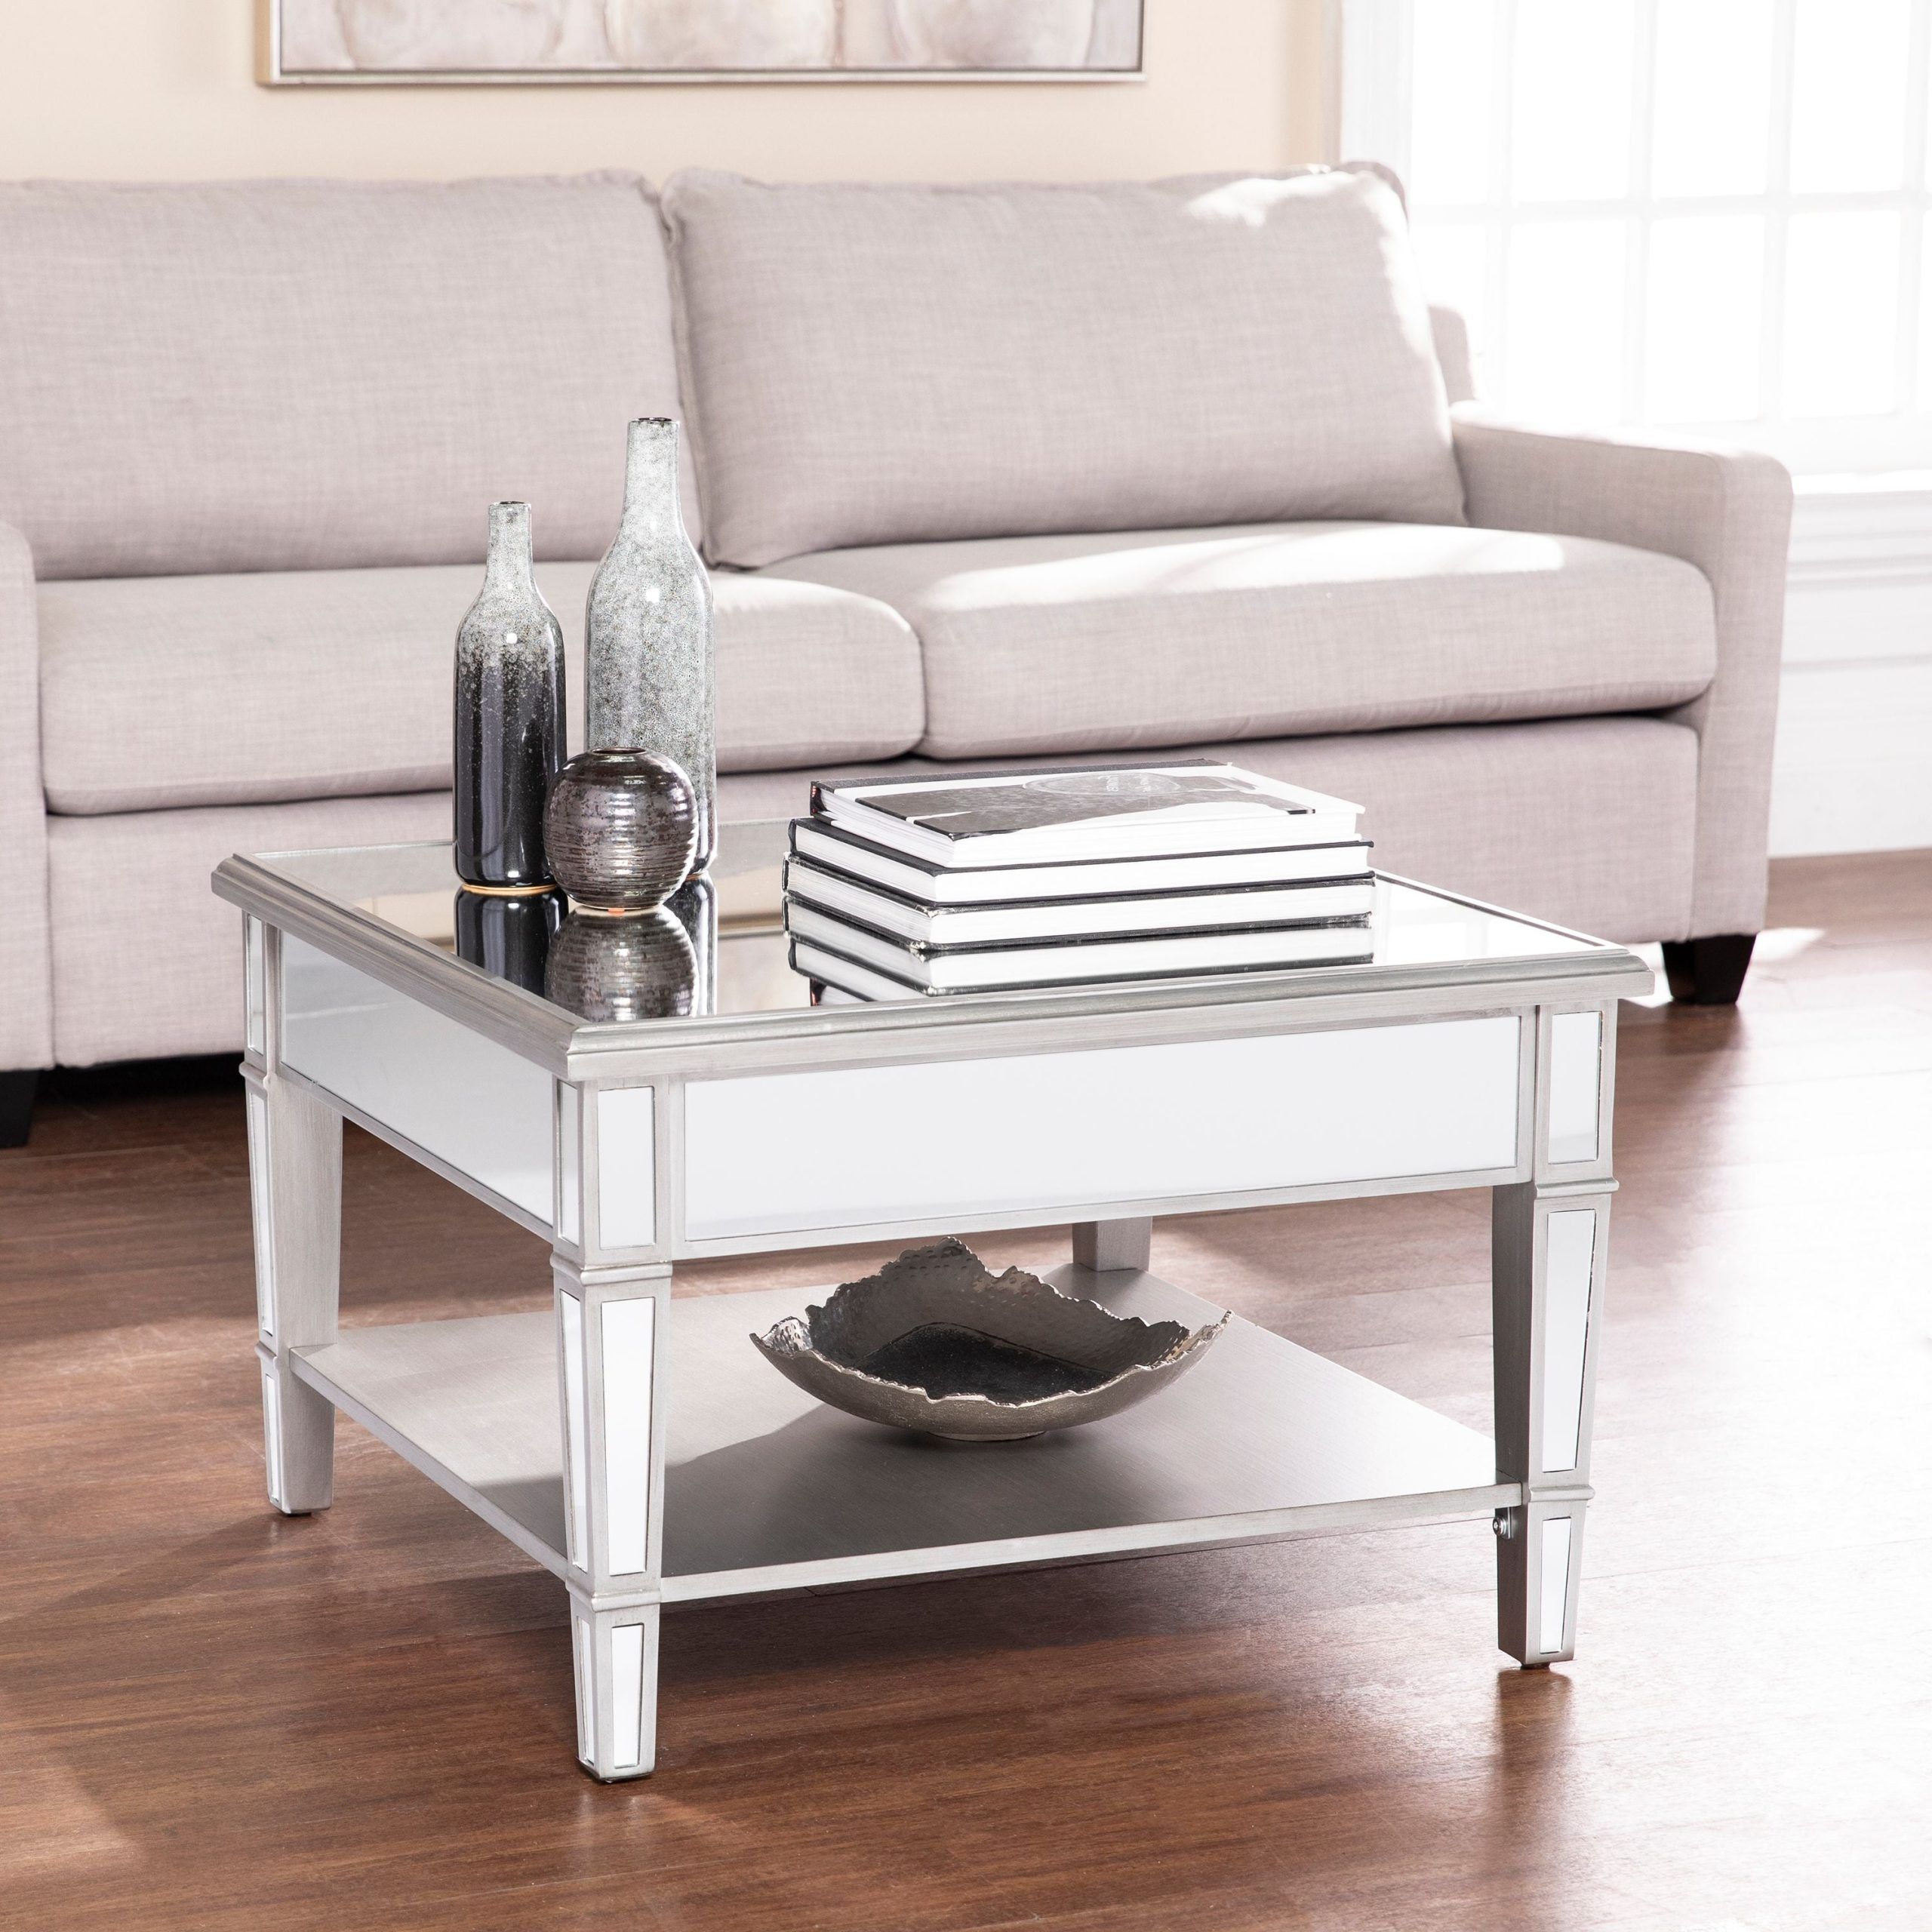 Latest Southern Enterprises Larksmill Coffee Tables With Regard To Ember Interiors Larksmill Mirrored Console Table, Silver – Walmart (View 4 of 10)